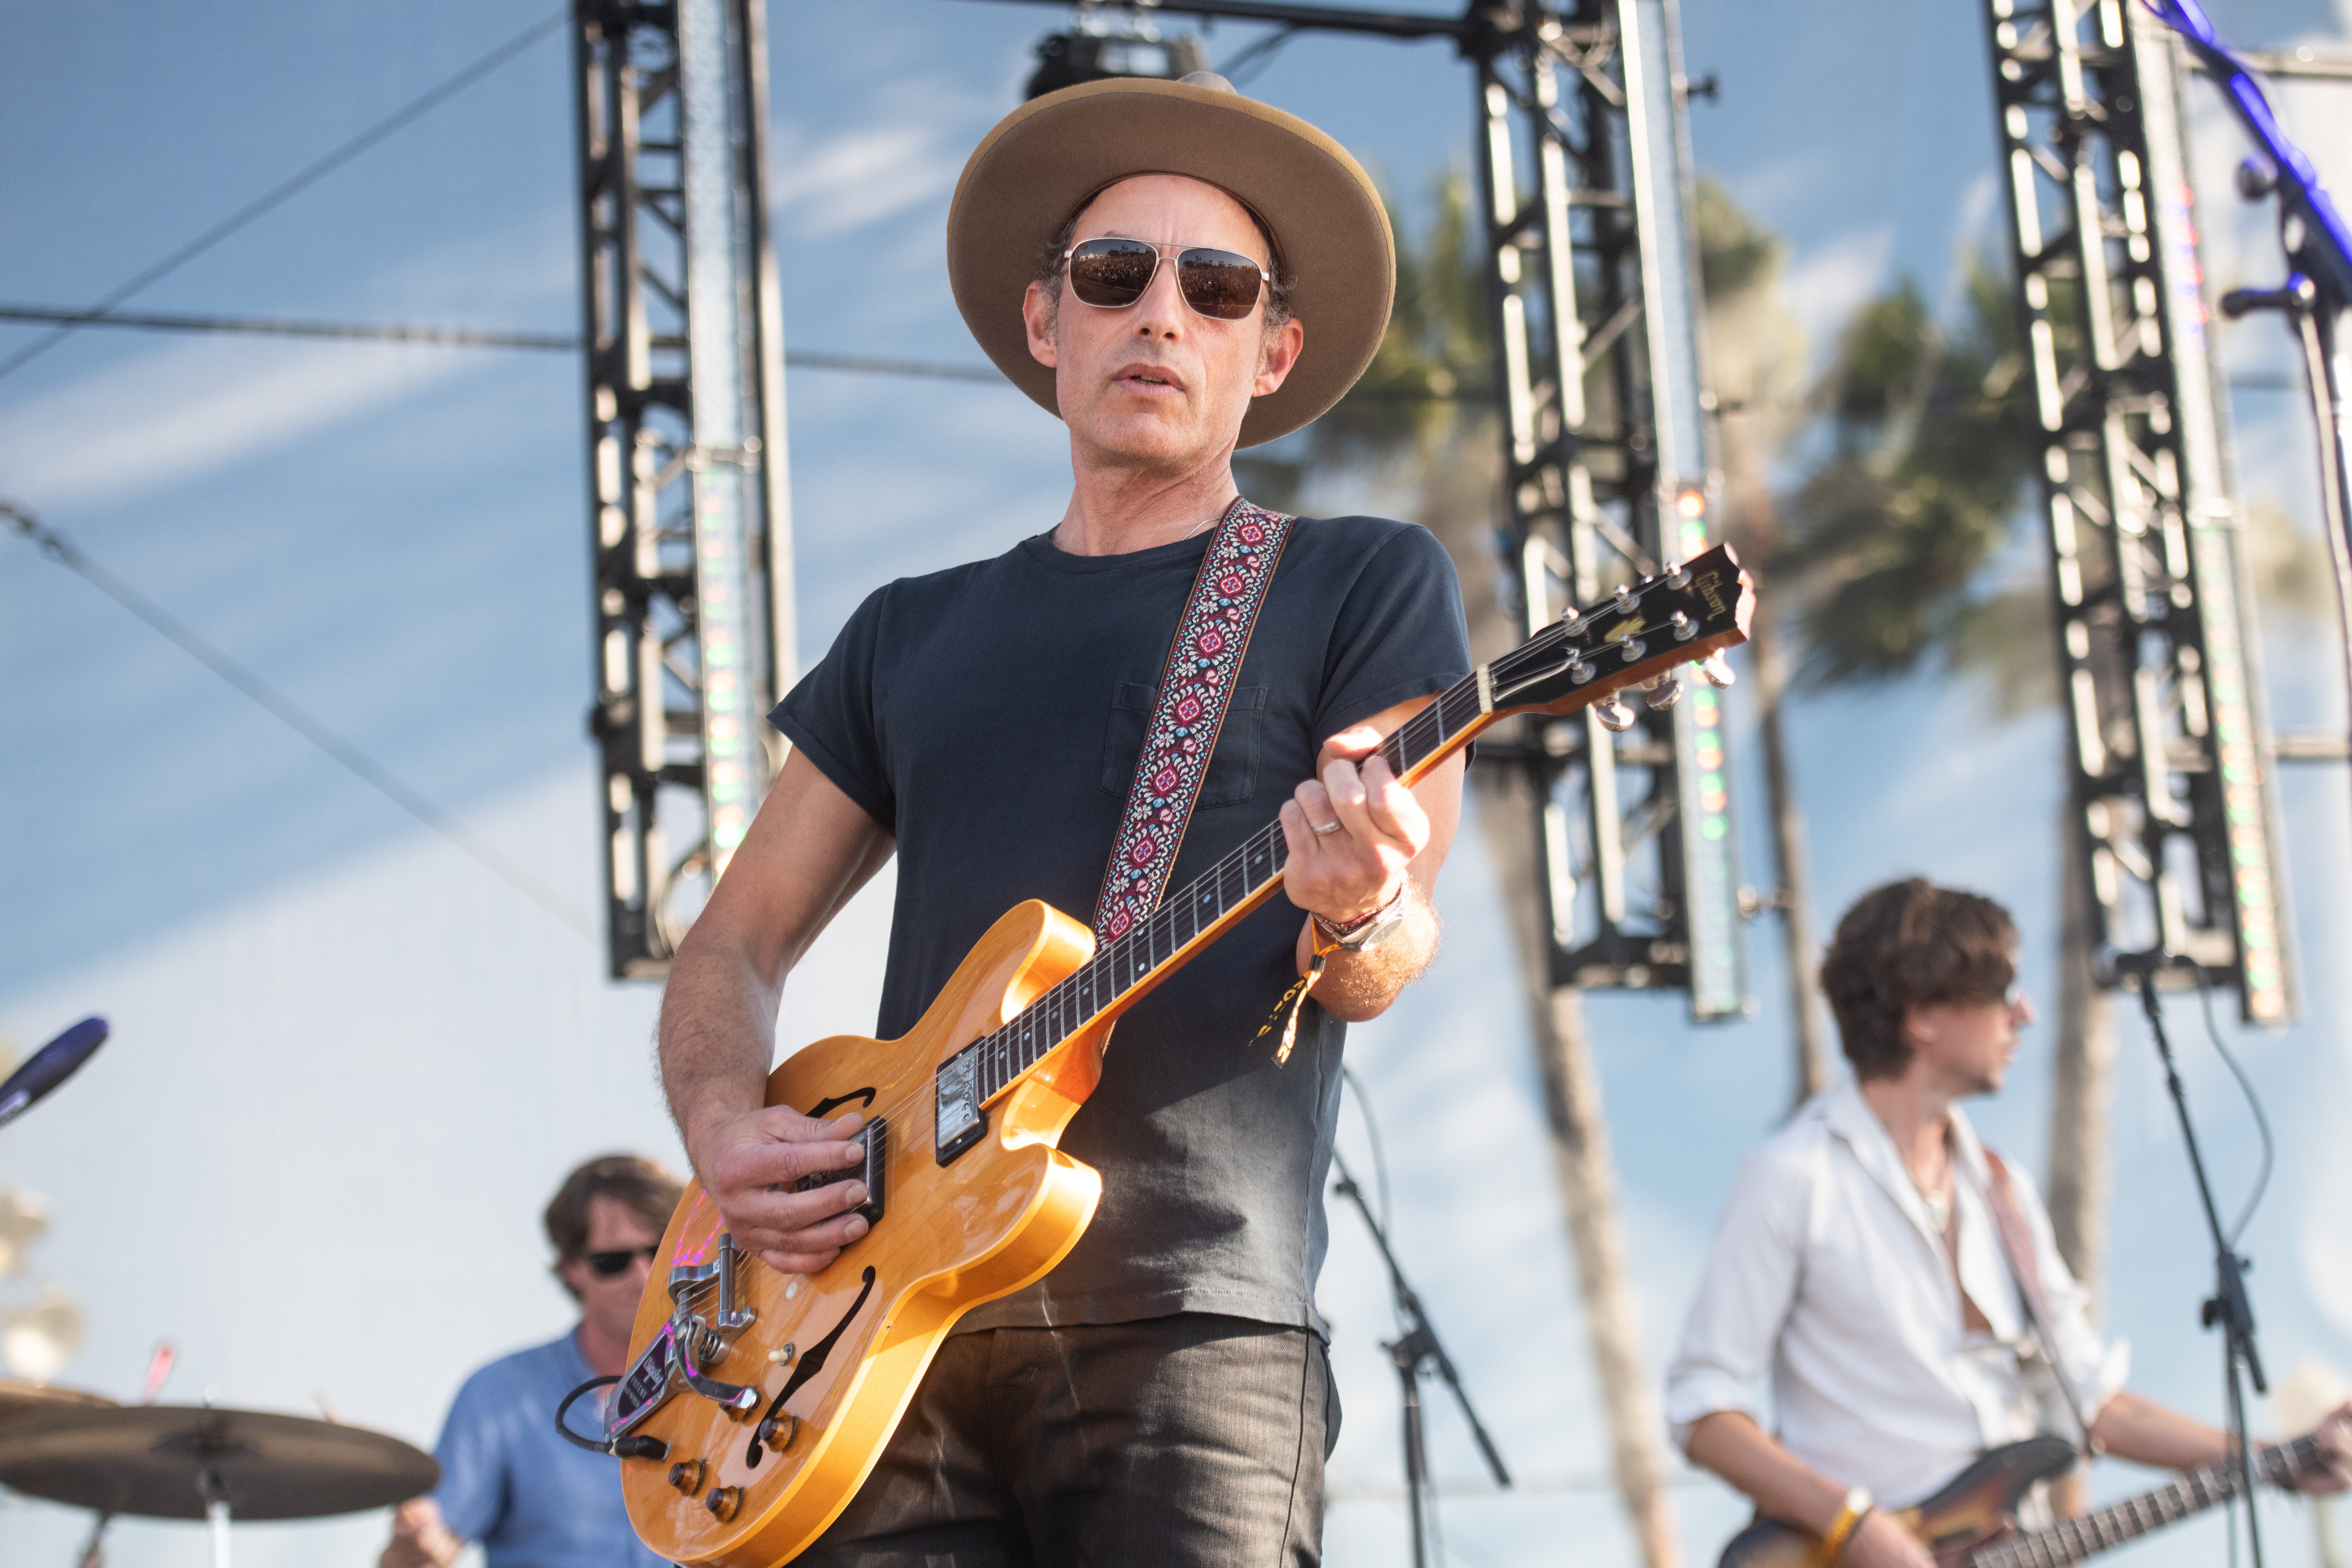 Jakob Dylan of The Wallflowers performing on stage at the 2021 Beach Life Music Festival on September 11, 2021 | Source: Getty Images